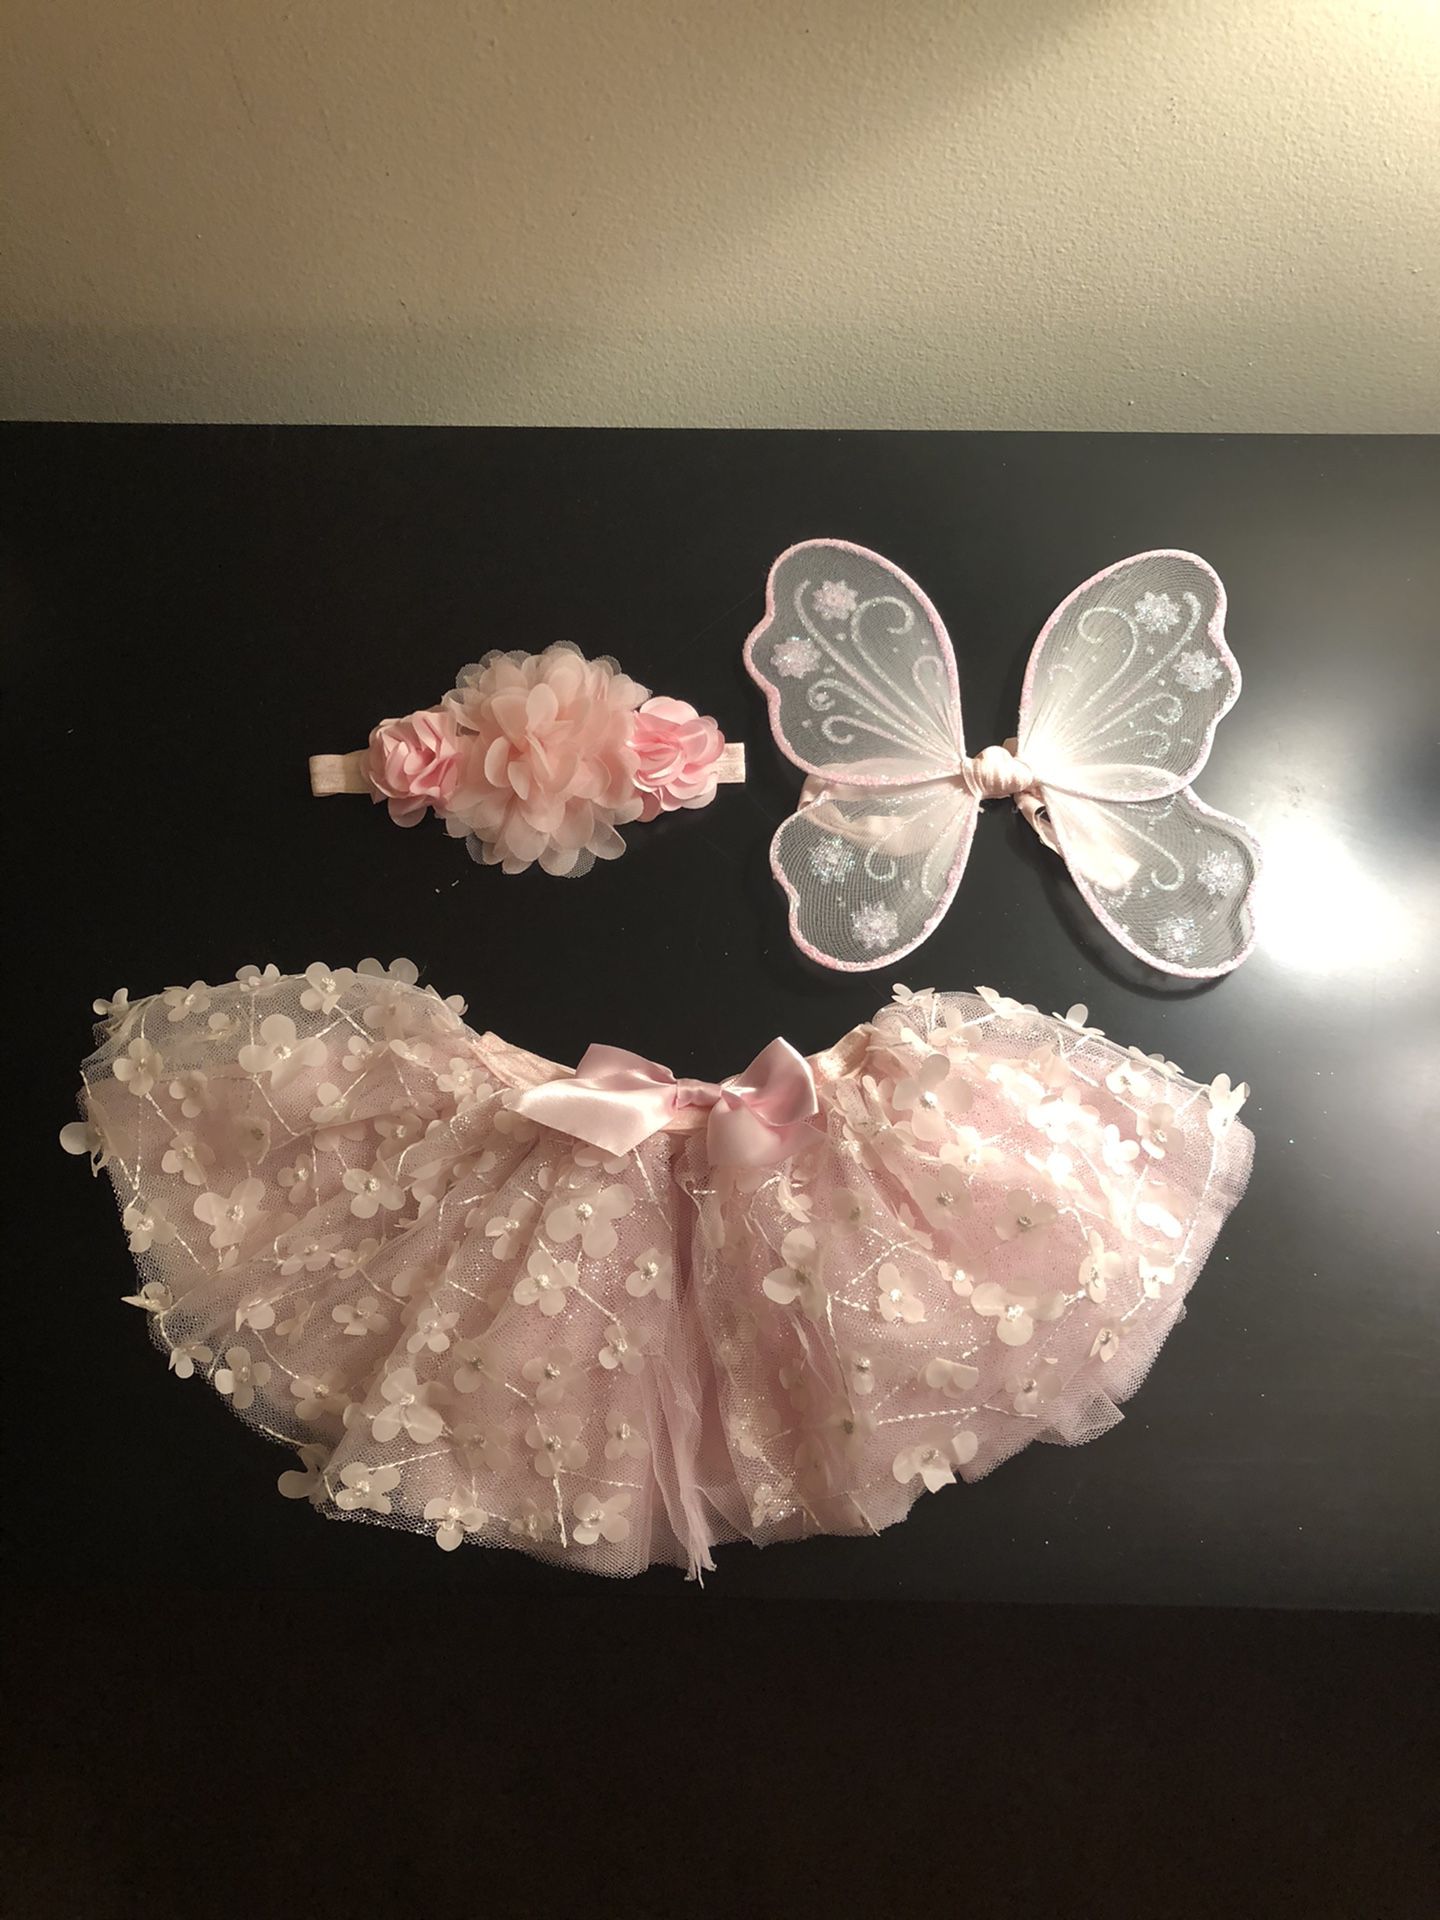 Like new’ 0-12 baby costume. Perfect condition